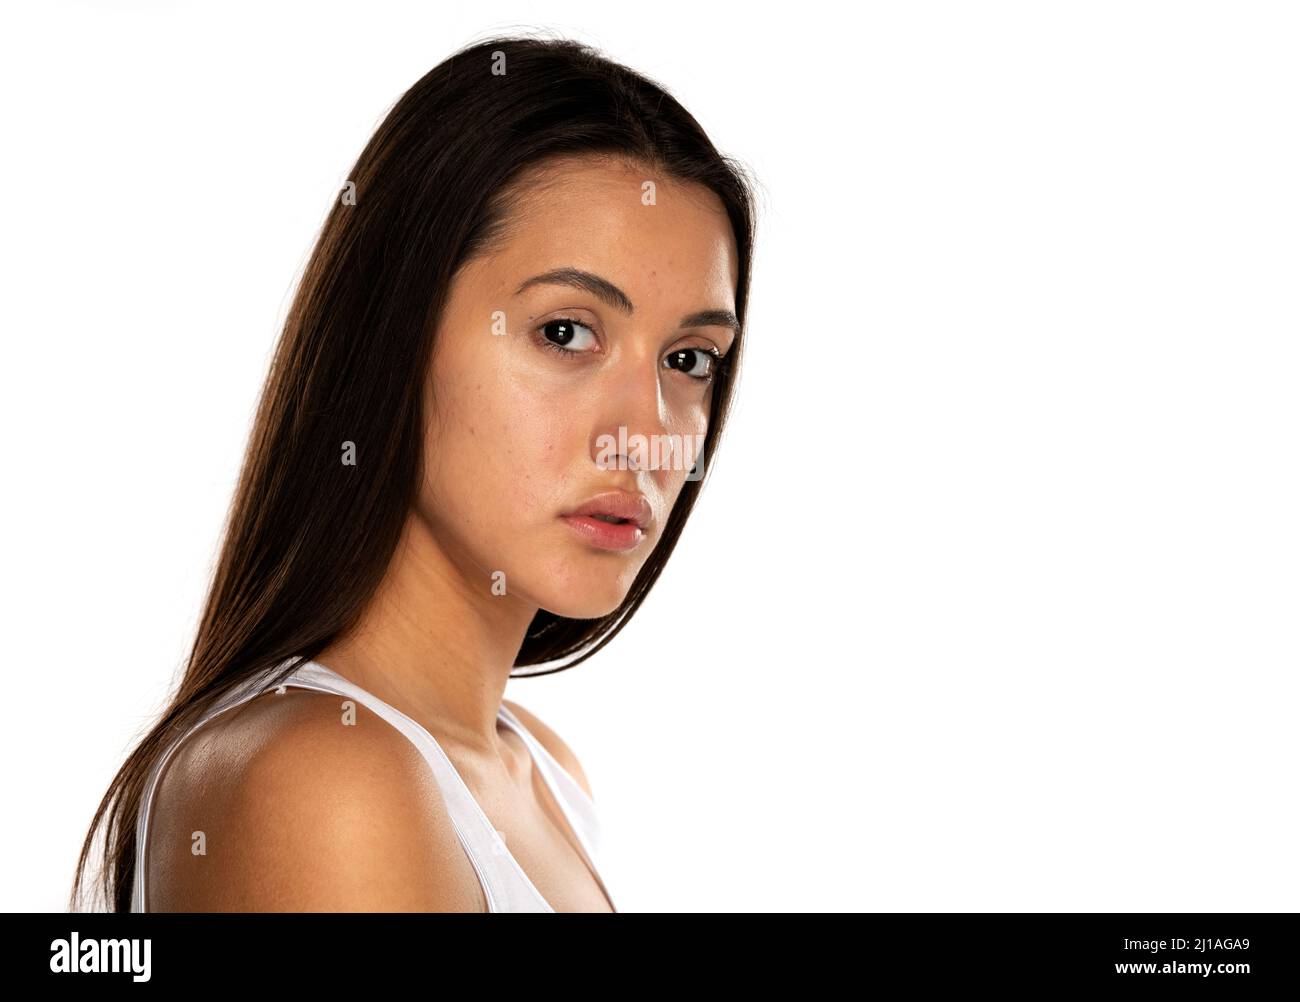 a young woman without makeup and long hair on a white background Stock Photo